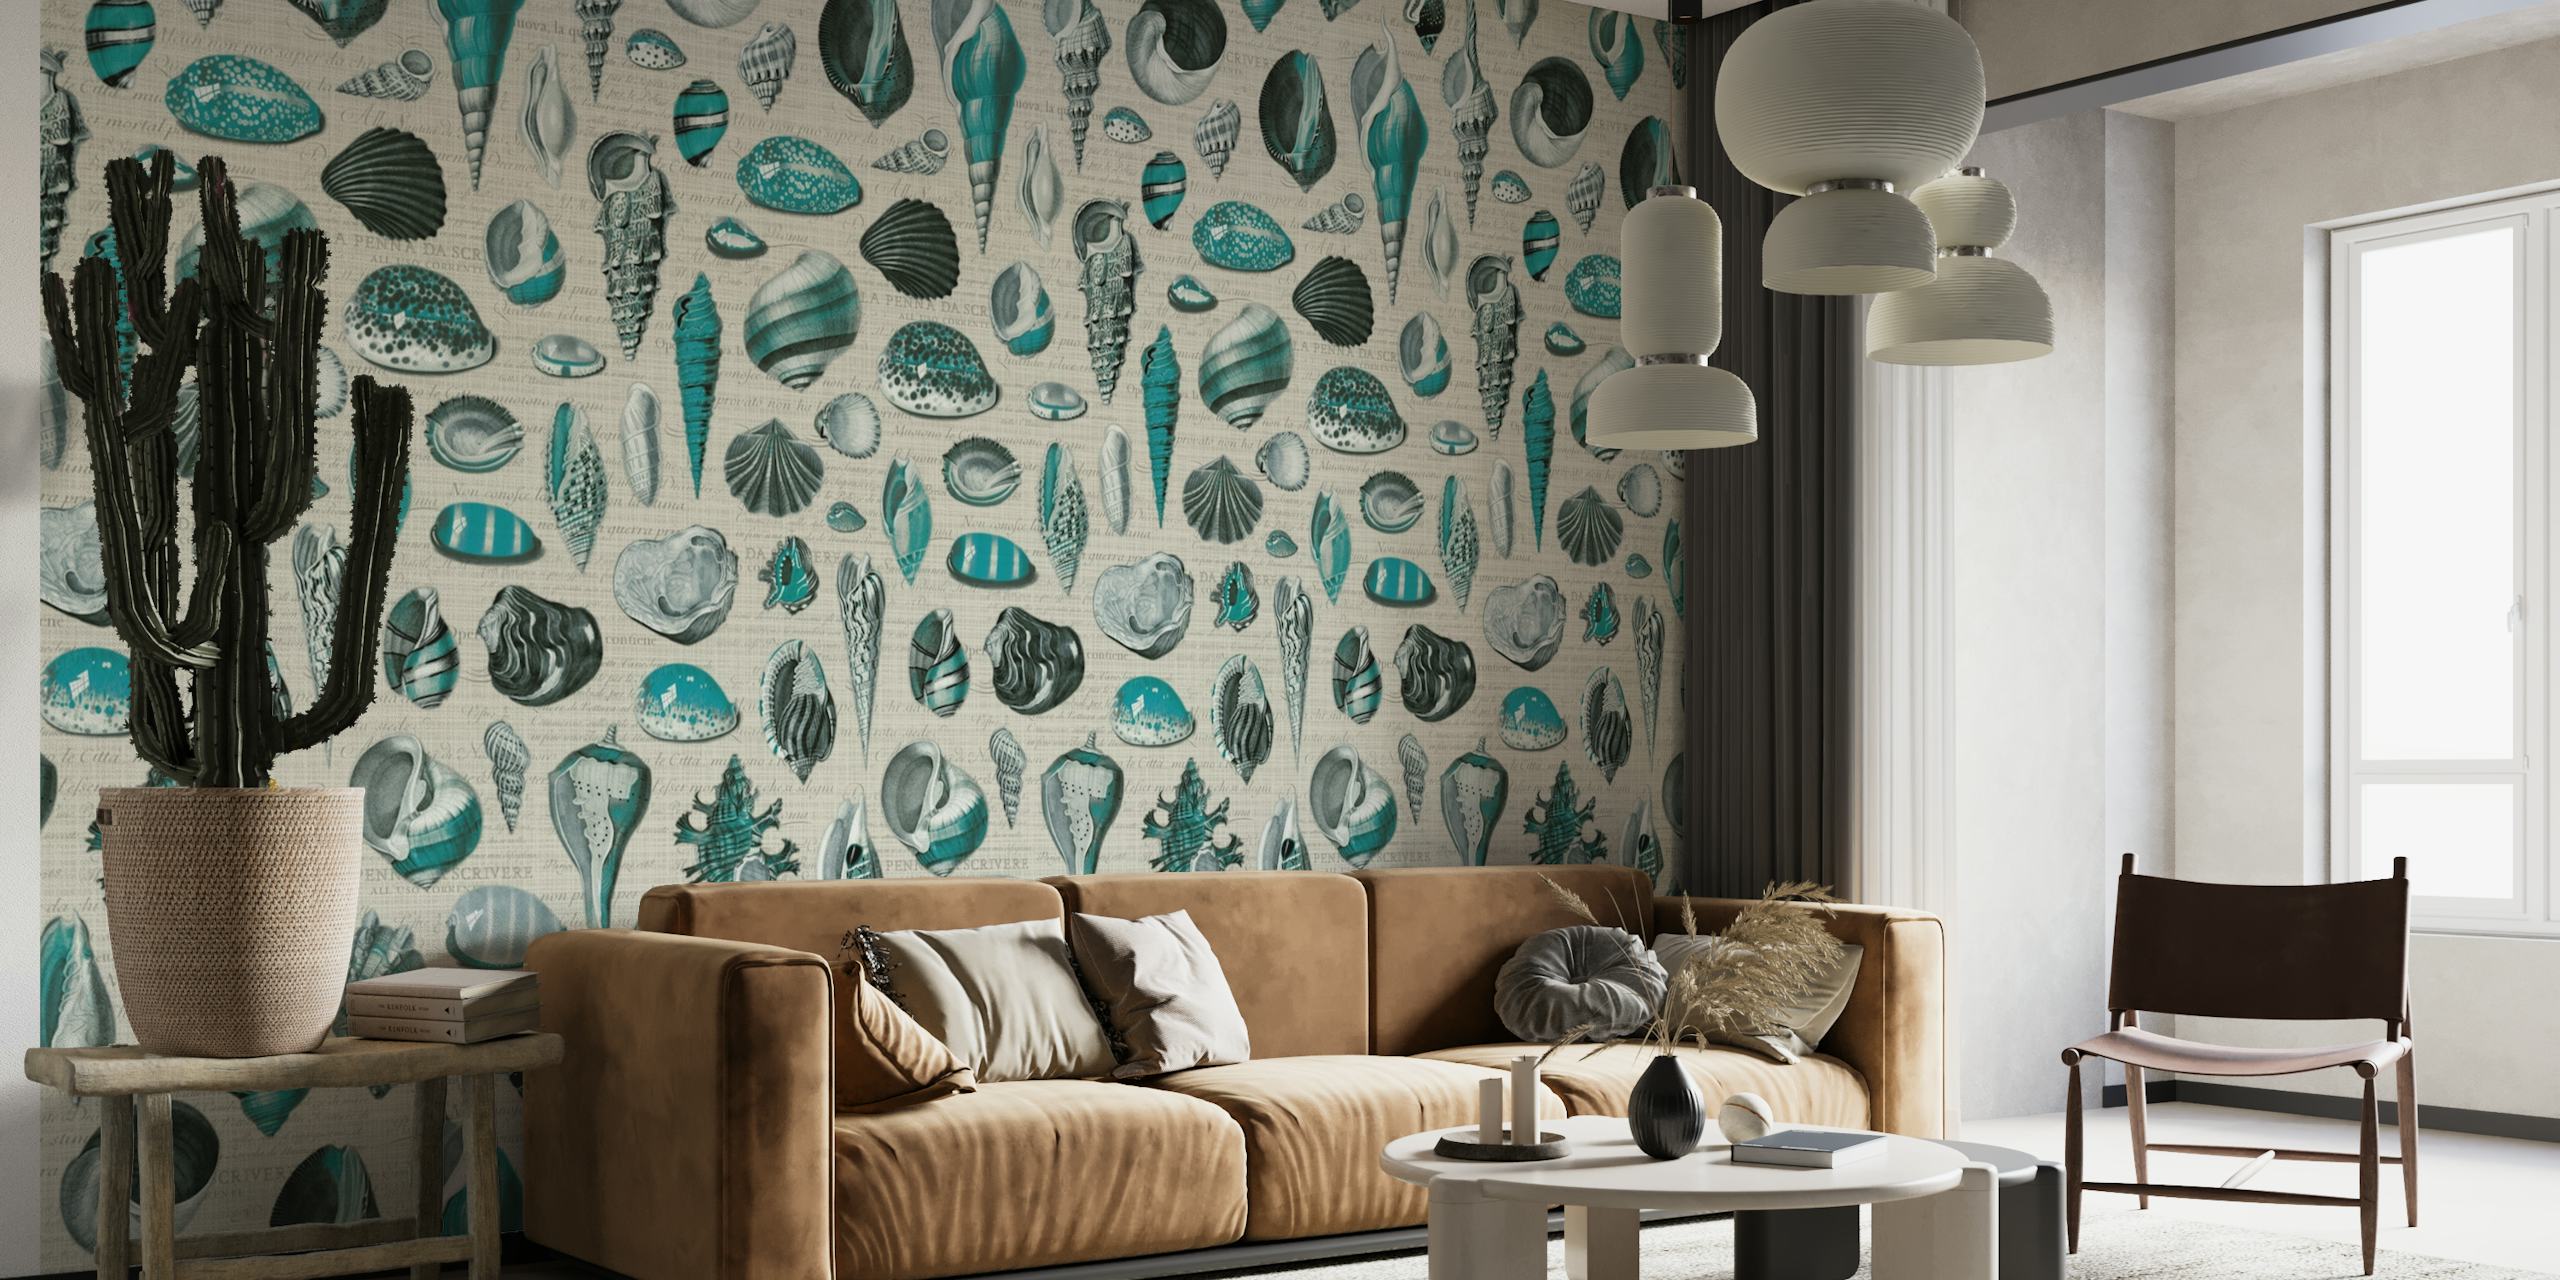 Nautilus shell pattern wall mural in grey and aqua blue